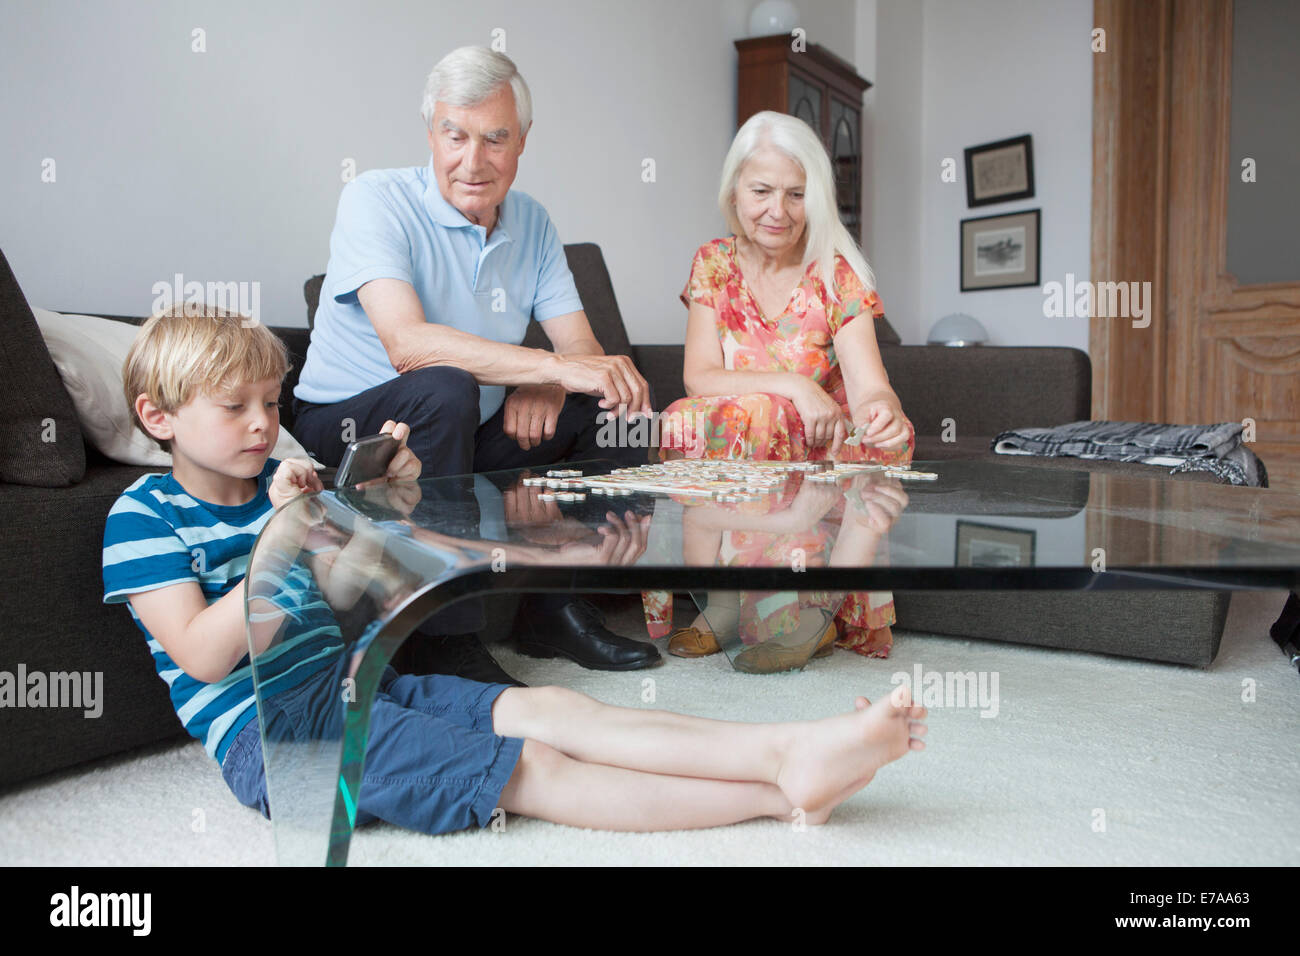 Grandparents and grandson spending leisure time in living room Stock Photo